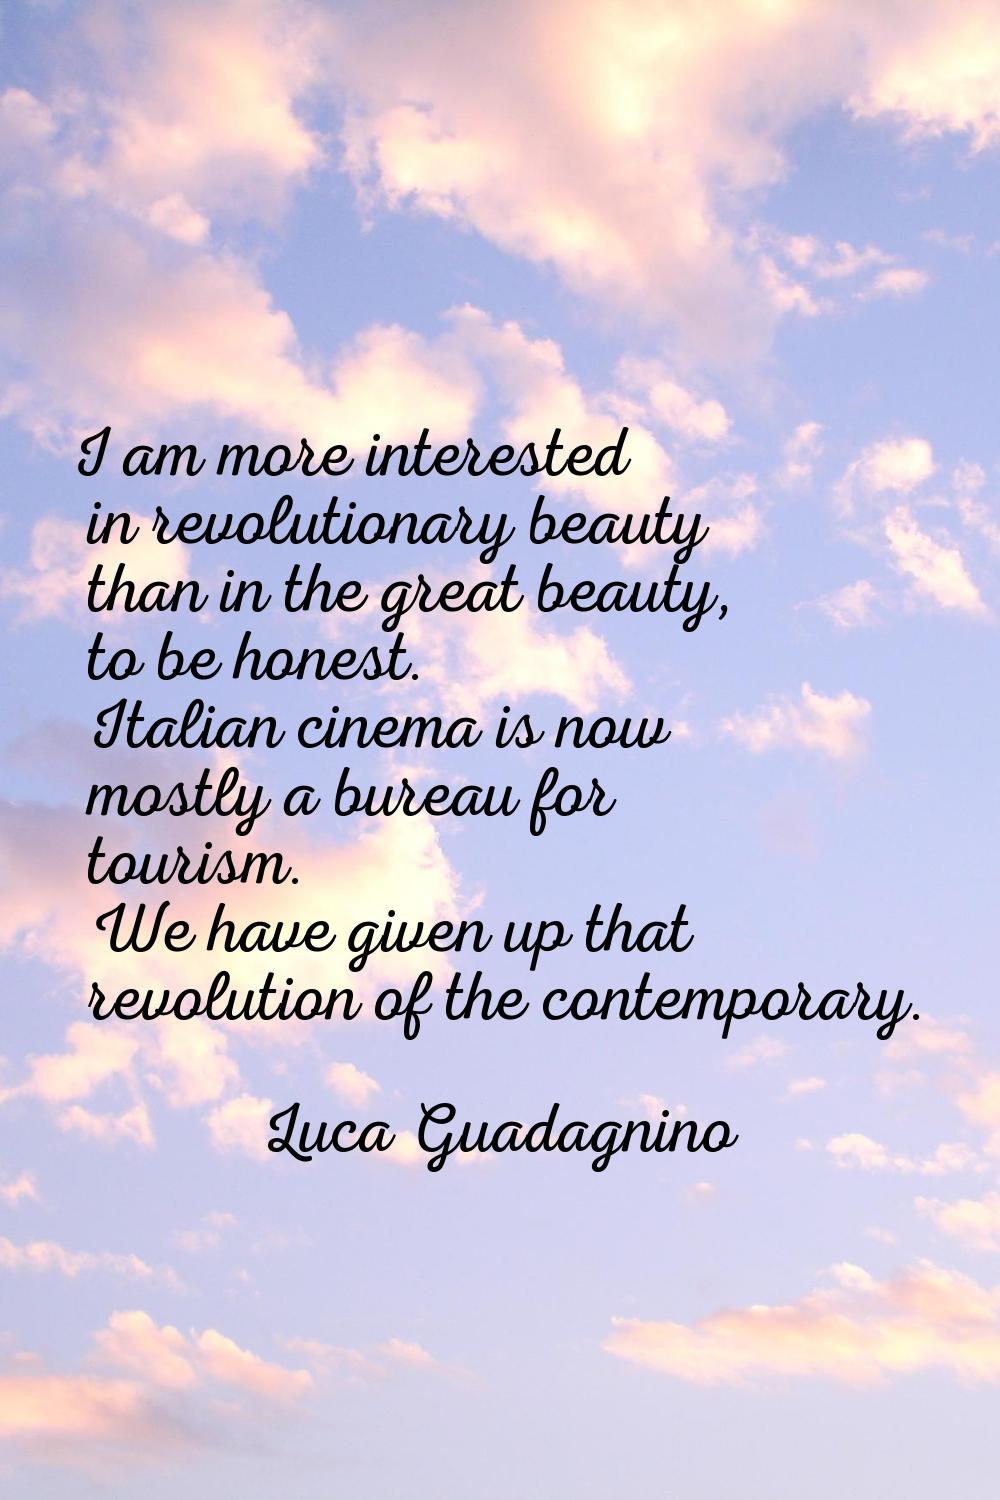 I am more interested in revolutionary beauty than in the great beauty, to be honest. Italian cinema